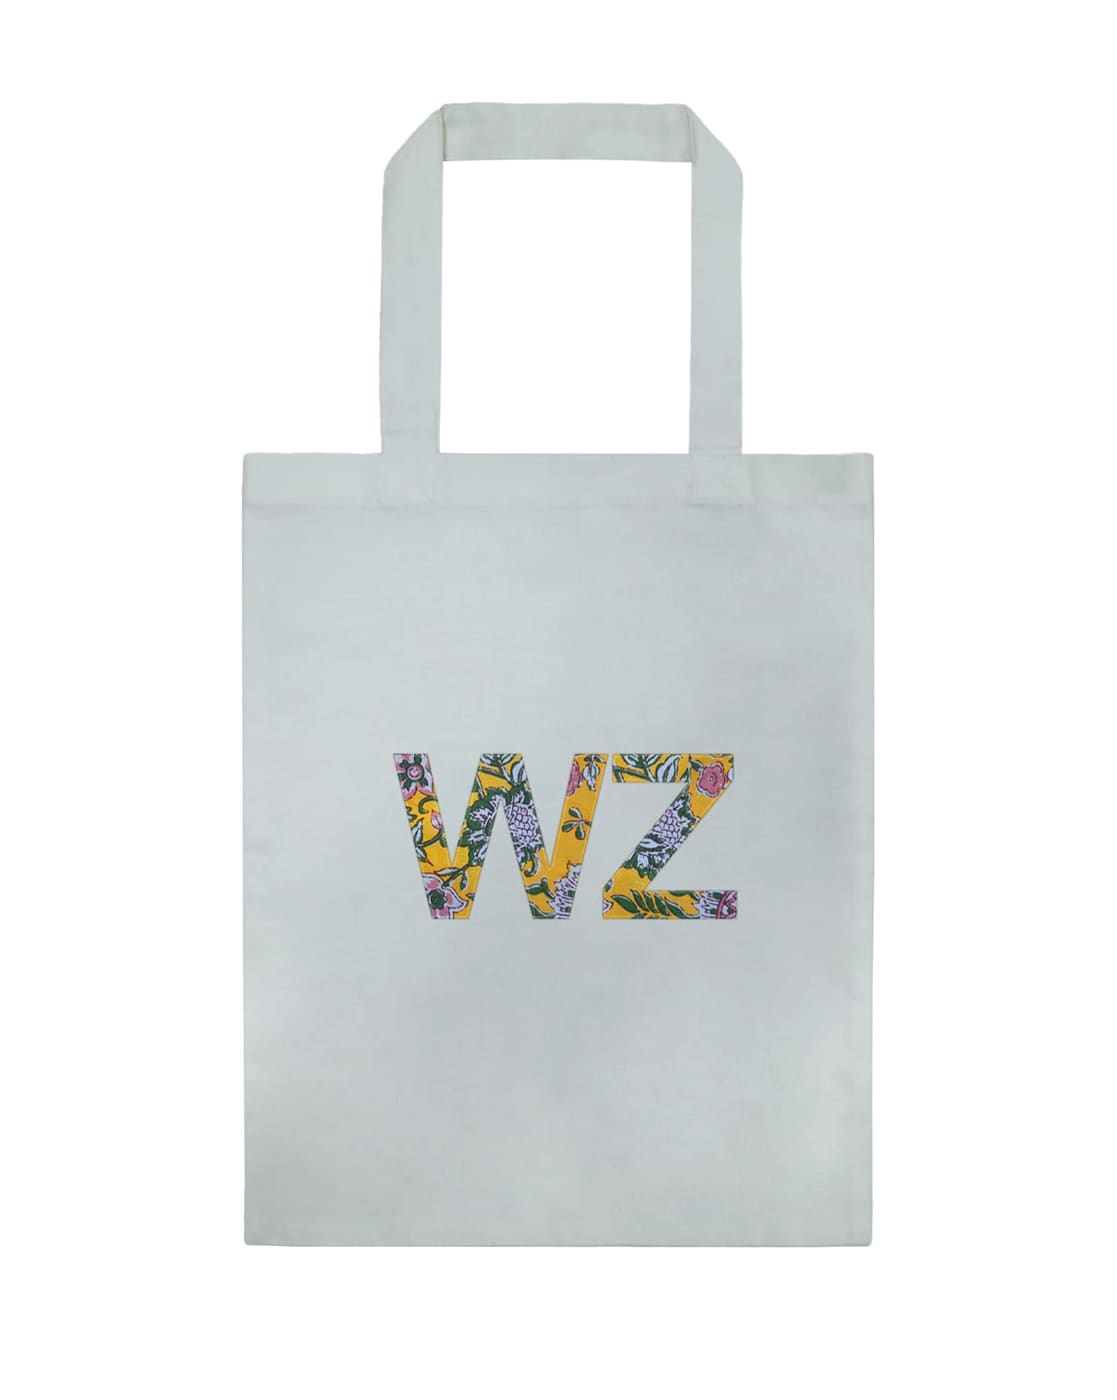 Buy Rubber Tote Bag Online In India -  India